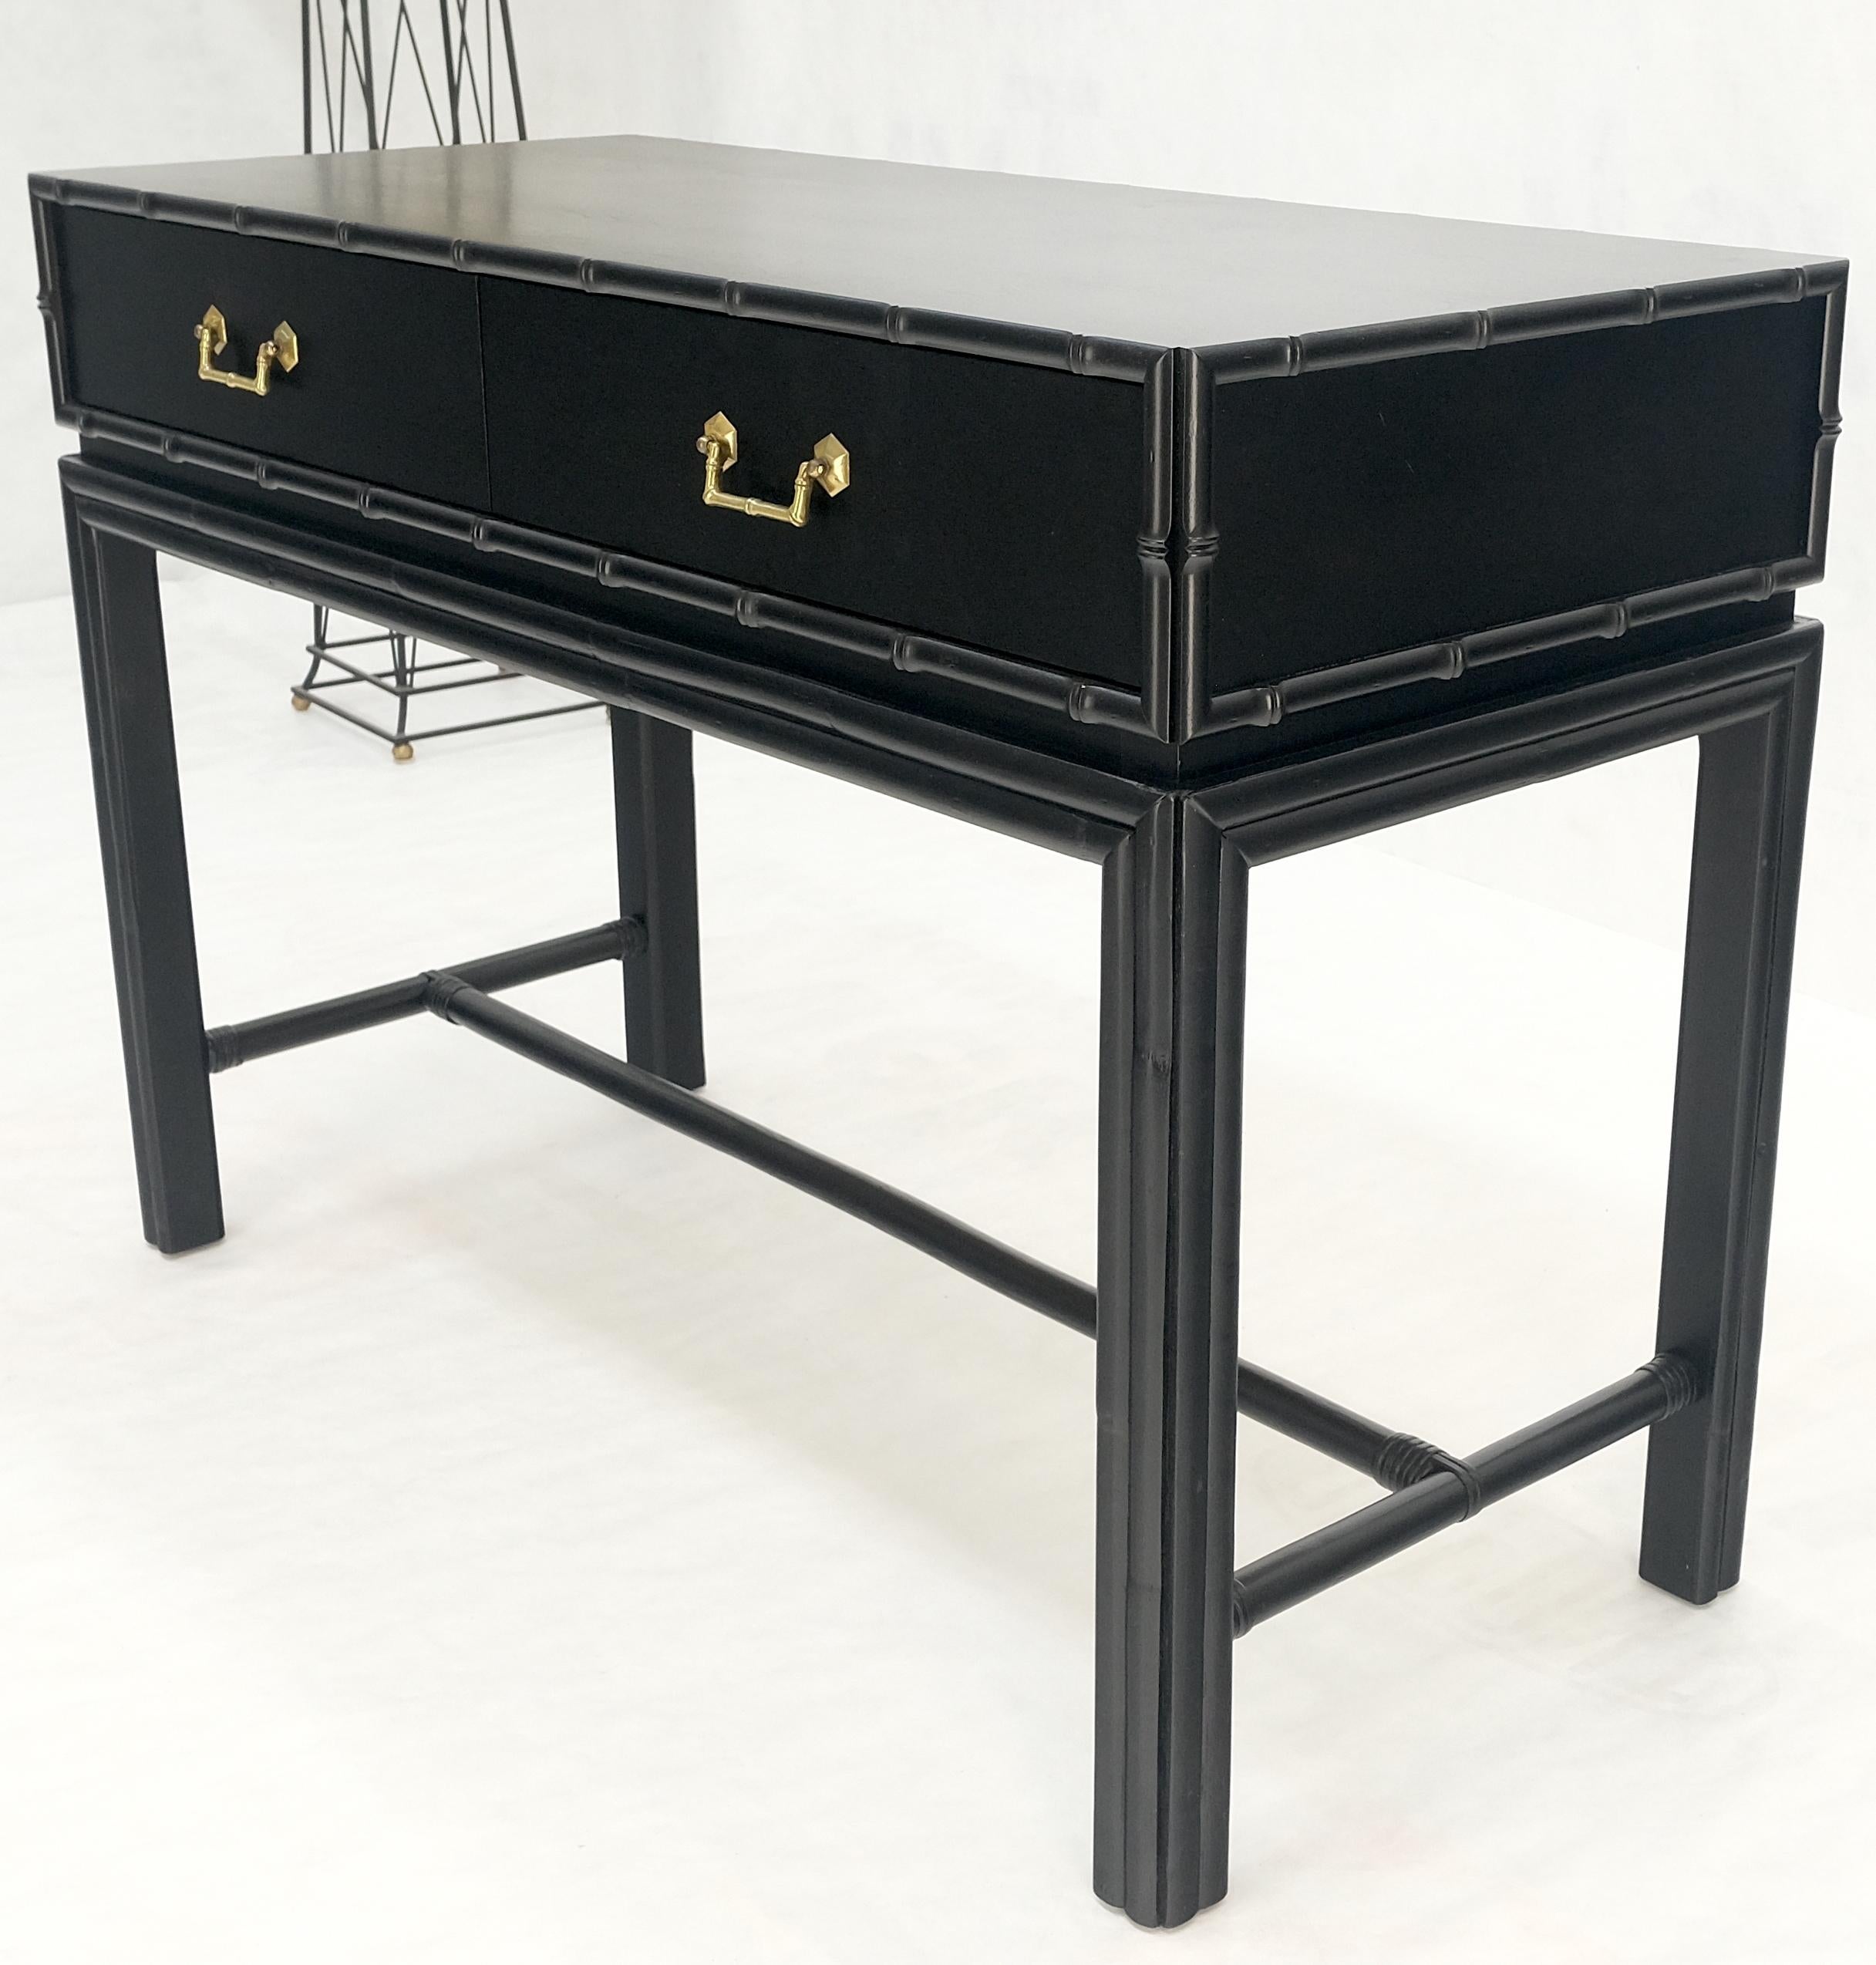 Ficks Reed Black Lacquer Faux Bamboo Solid Brass Pulls Two Drawer Console Desk In Excellent Condition For Sale In Rockaway, NJ